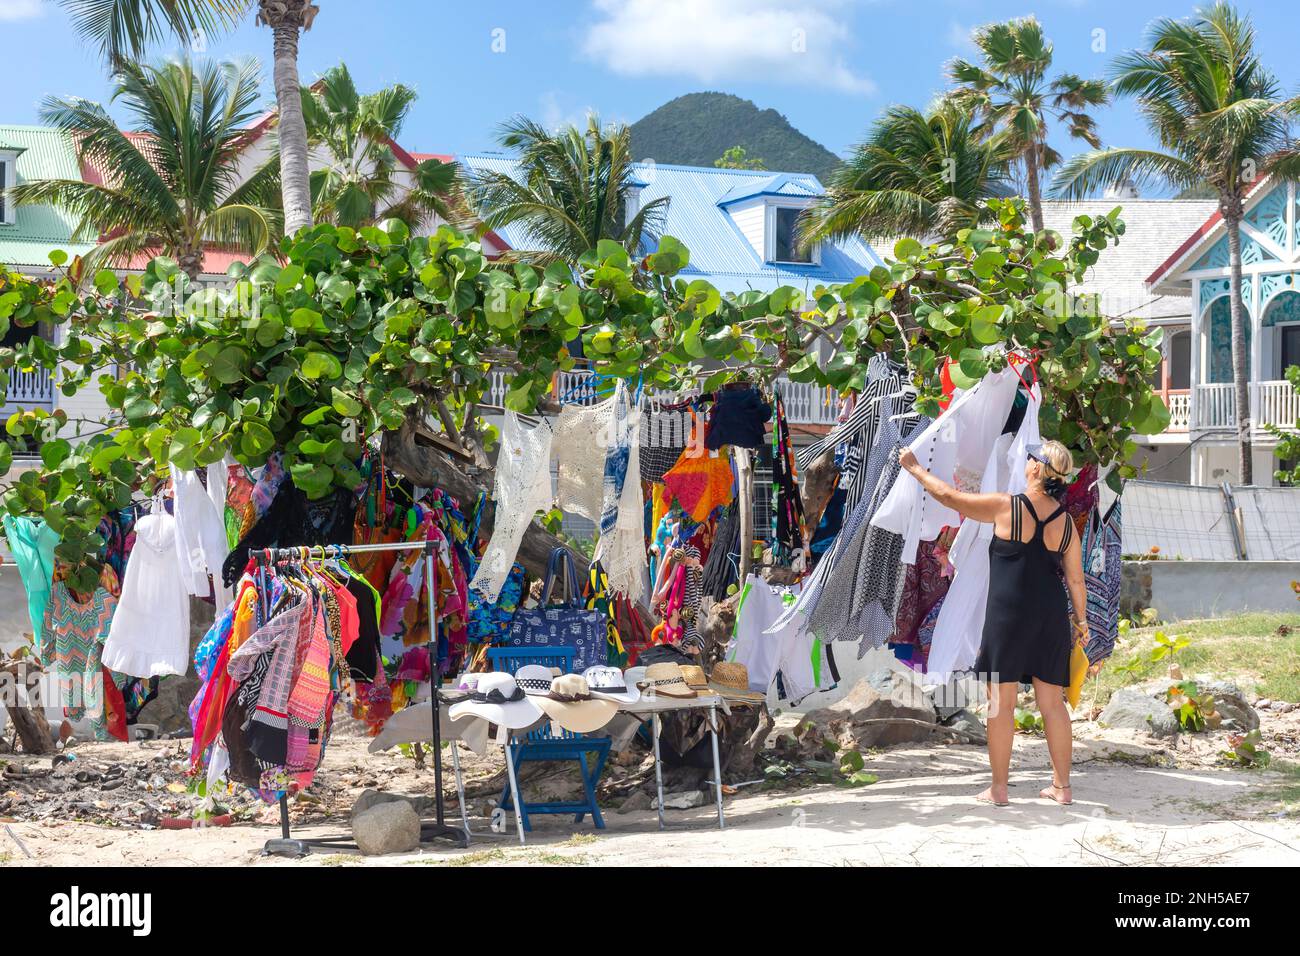 Woman looking at clothing stall by beach, Orient Bay (Baie Orientale), St Martin (Saint-Martin), Lesser Antilles, Caribbean Stock Photo